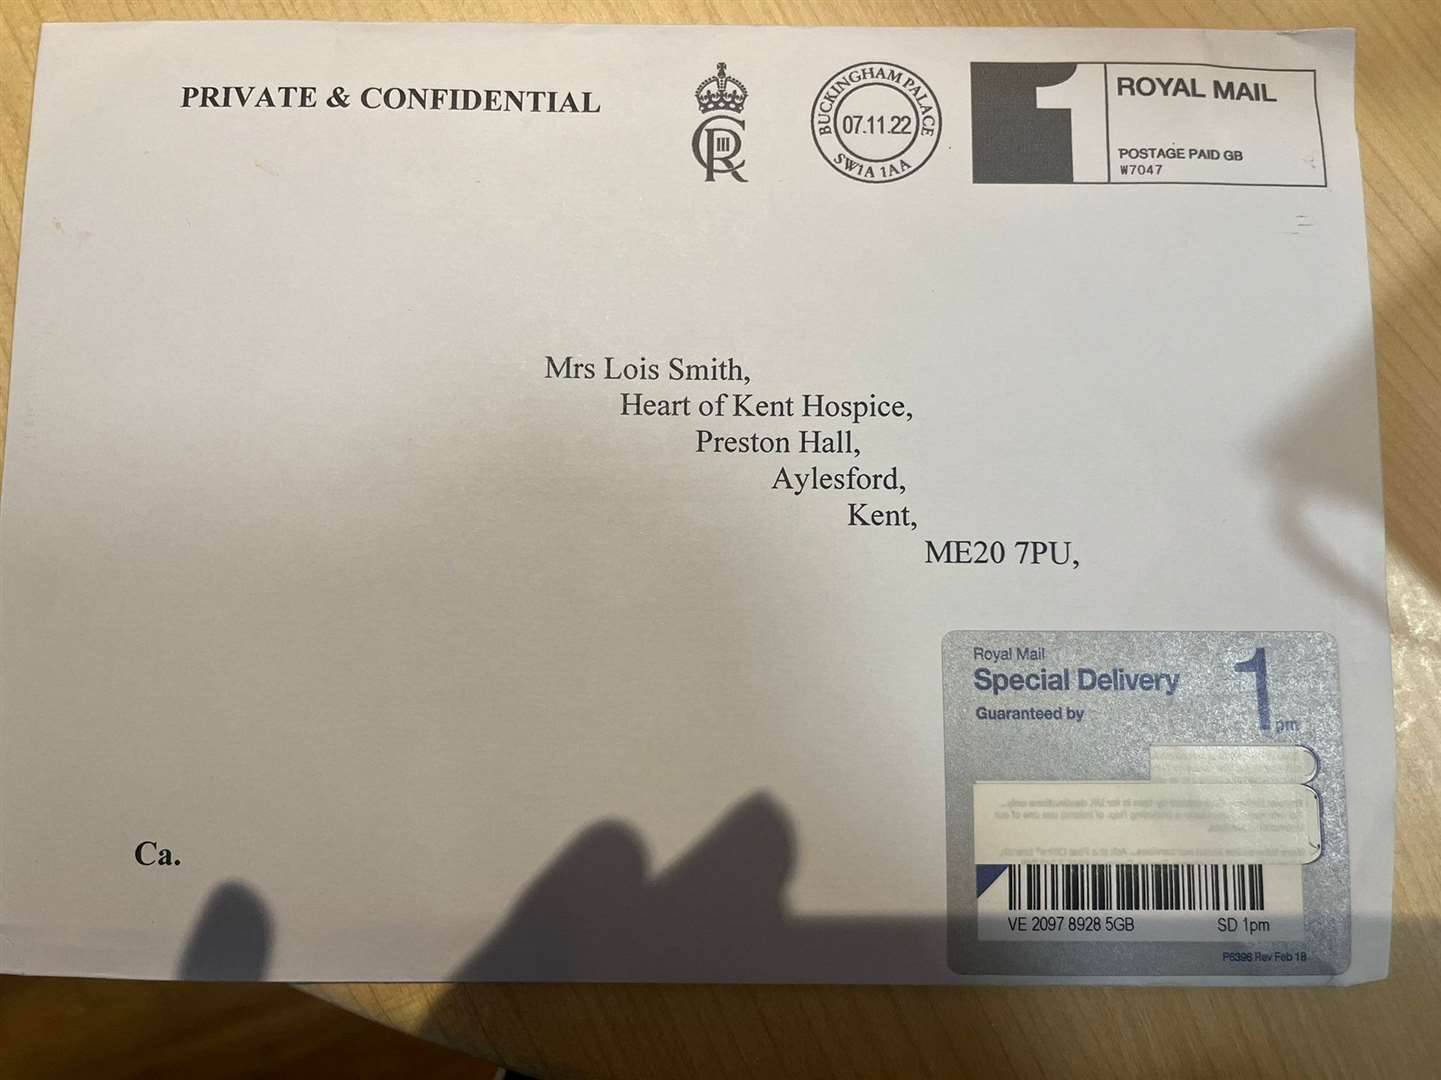 Lois received a letter from Queen Consort Camilla